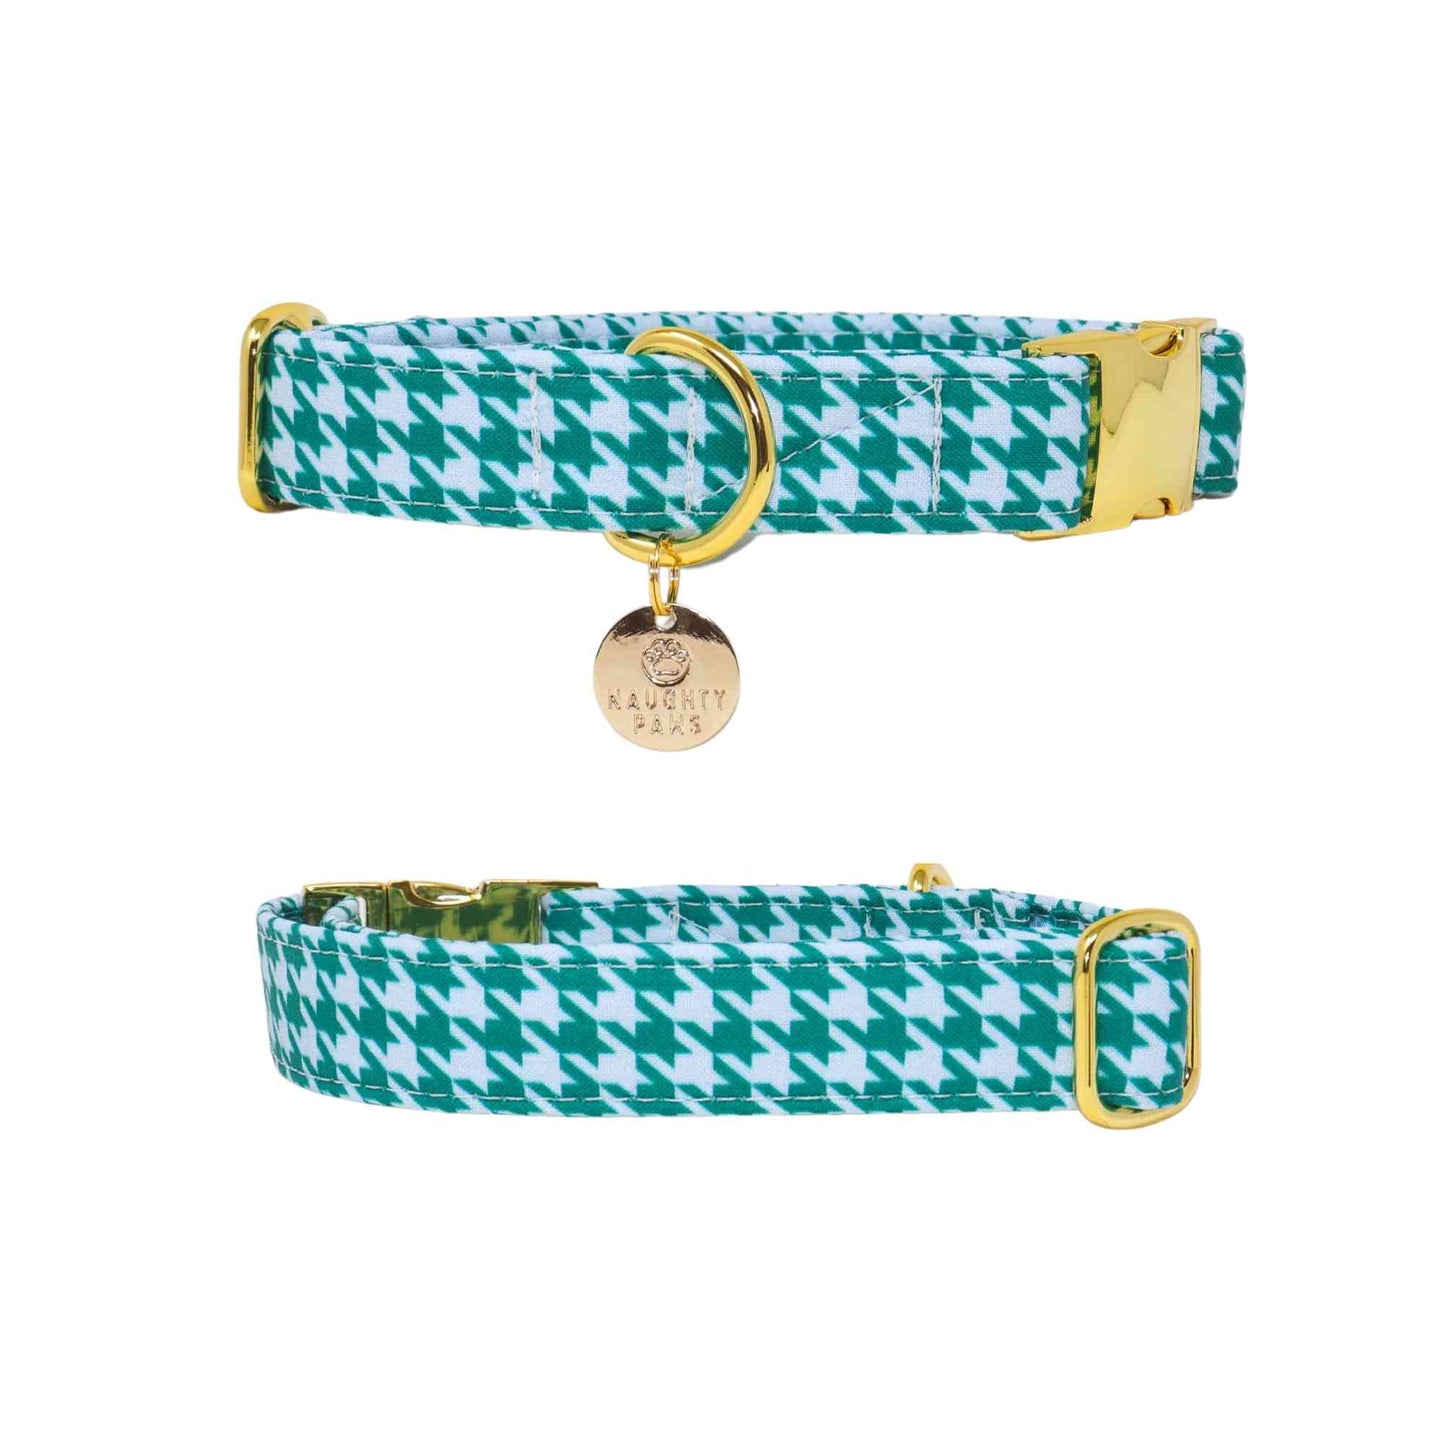 Looking for a high-quality and stylish collar for your boy dog? Our "George" Green and Blue Houndstooth Boy Dog Collar is the perfect choice! Handmade with love and care, our collar is available in sizes ranging from extra extra small to extra large, ensuring a perfect fit for any pup.